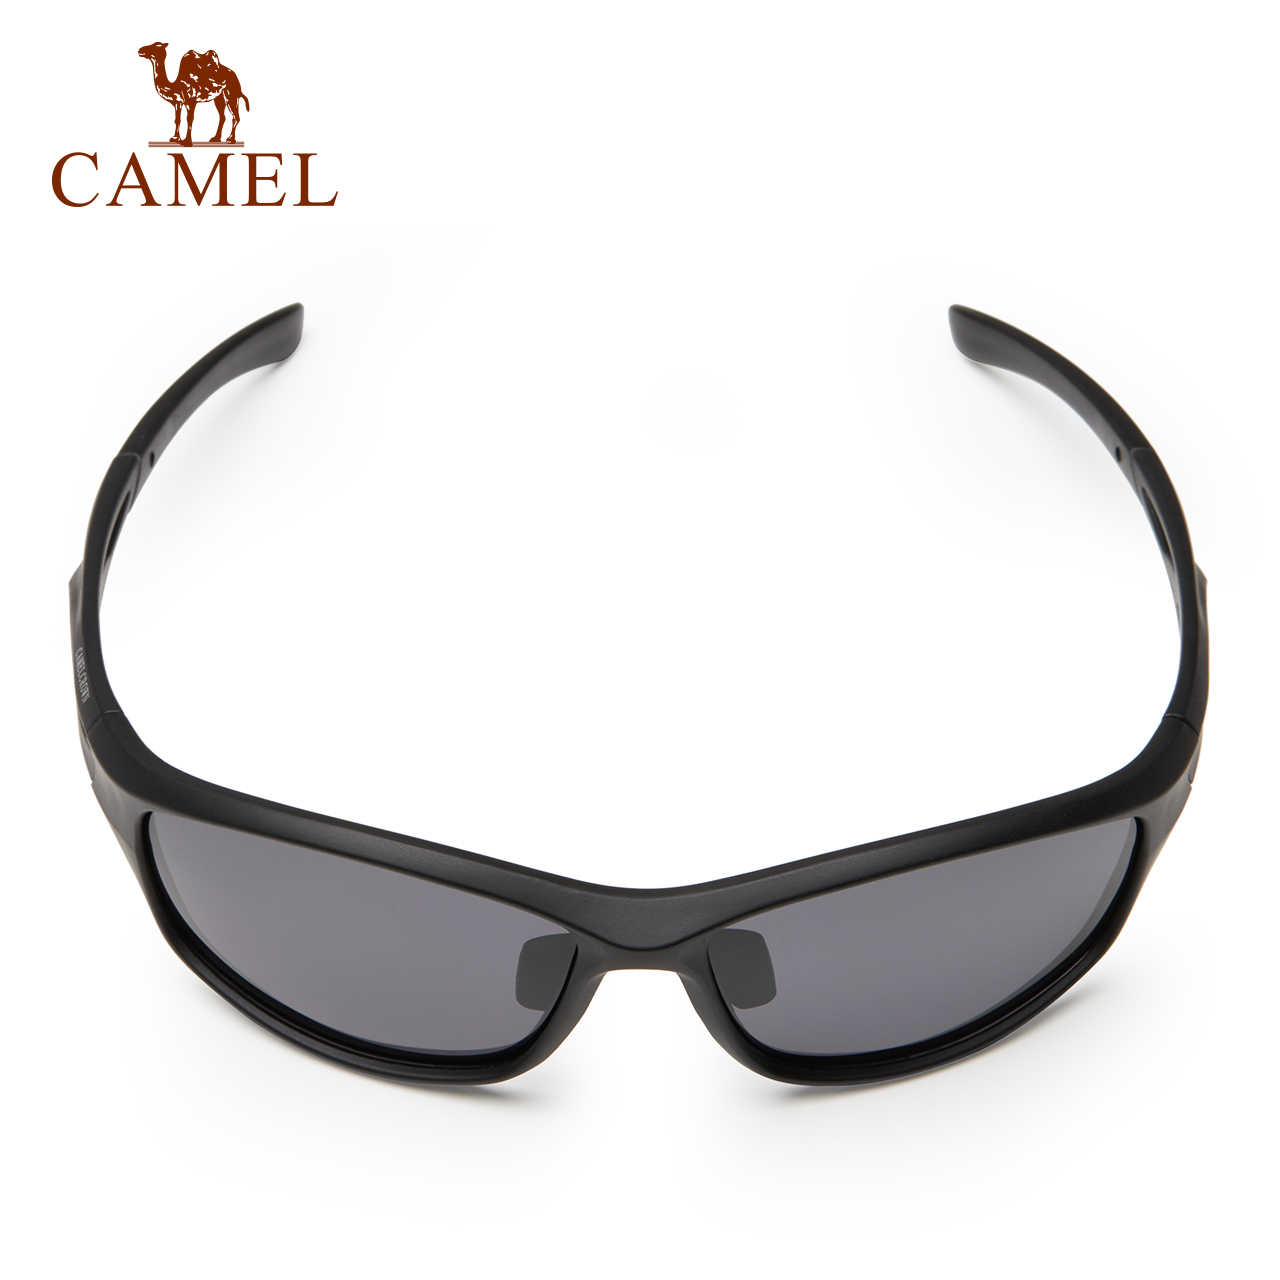 CAMEL Sports Hiking and Riding Windproof Non-myopia Sunglasses